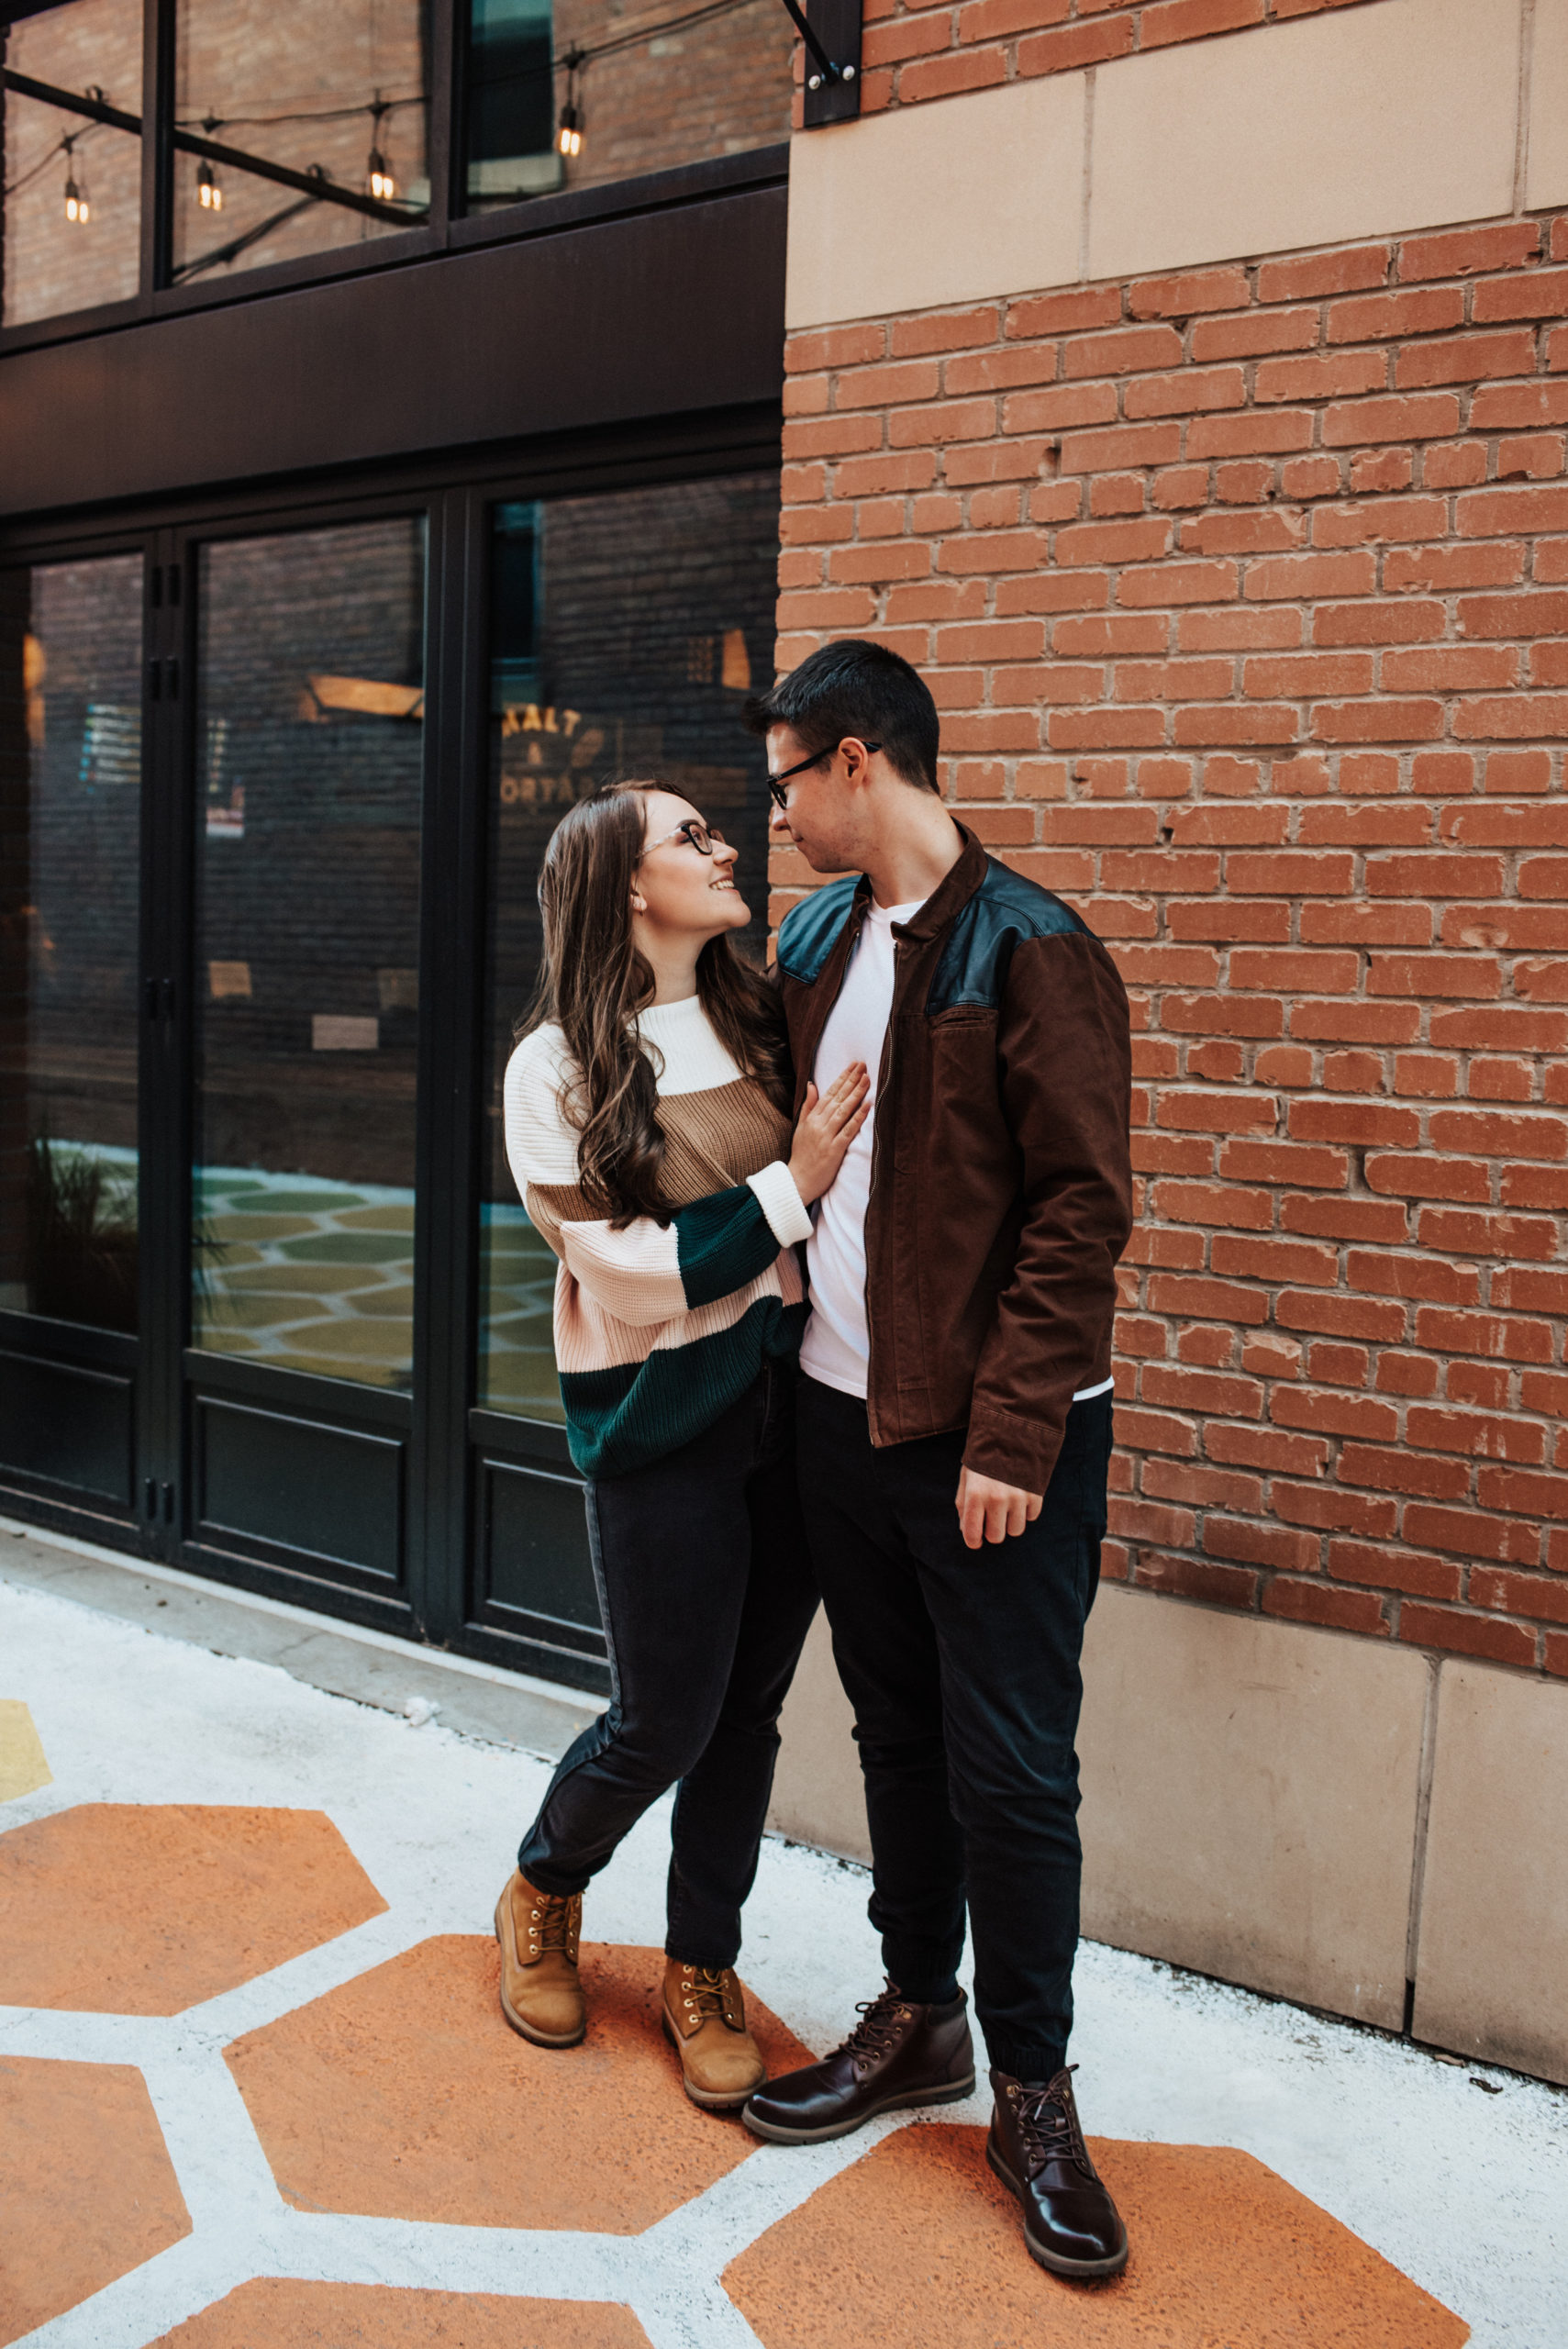 Engagement Session Tips - Crush Your Outfits, Locations and More